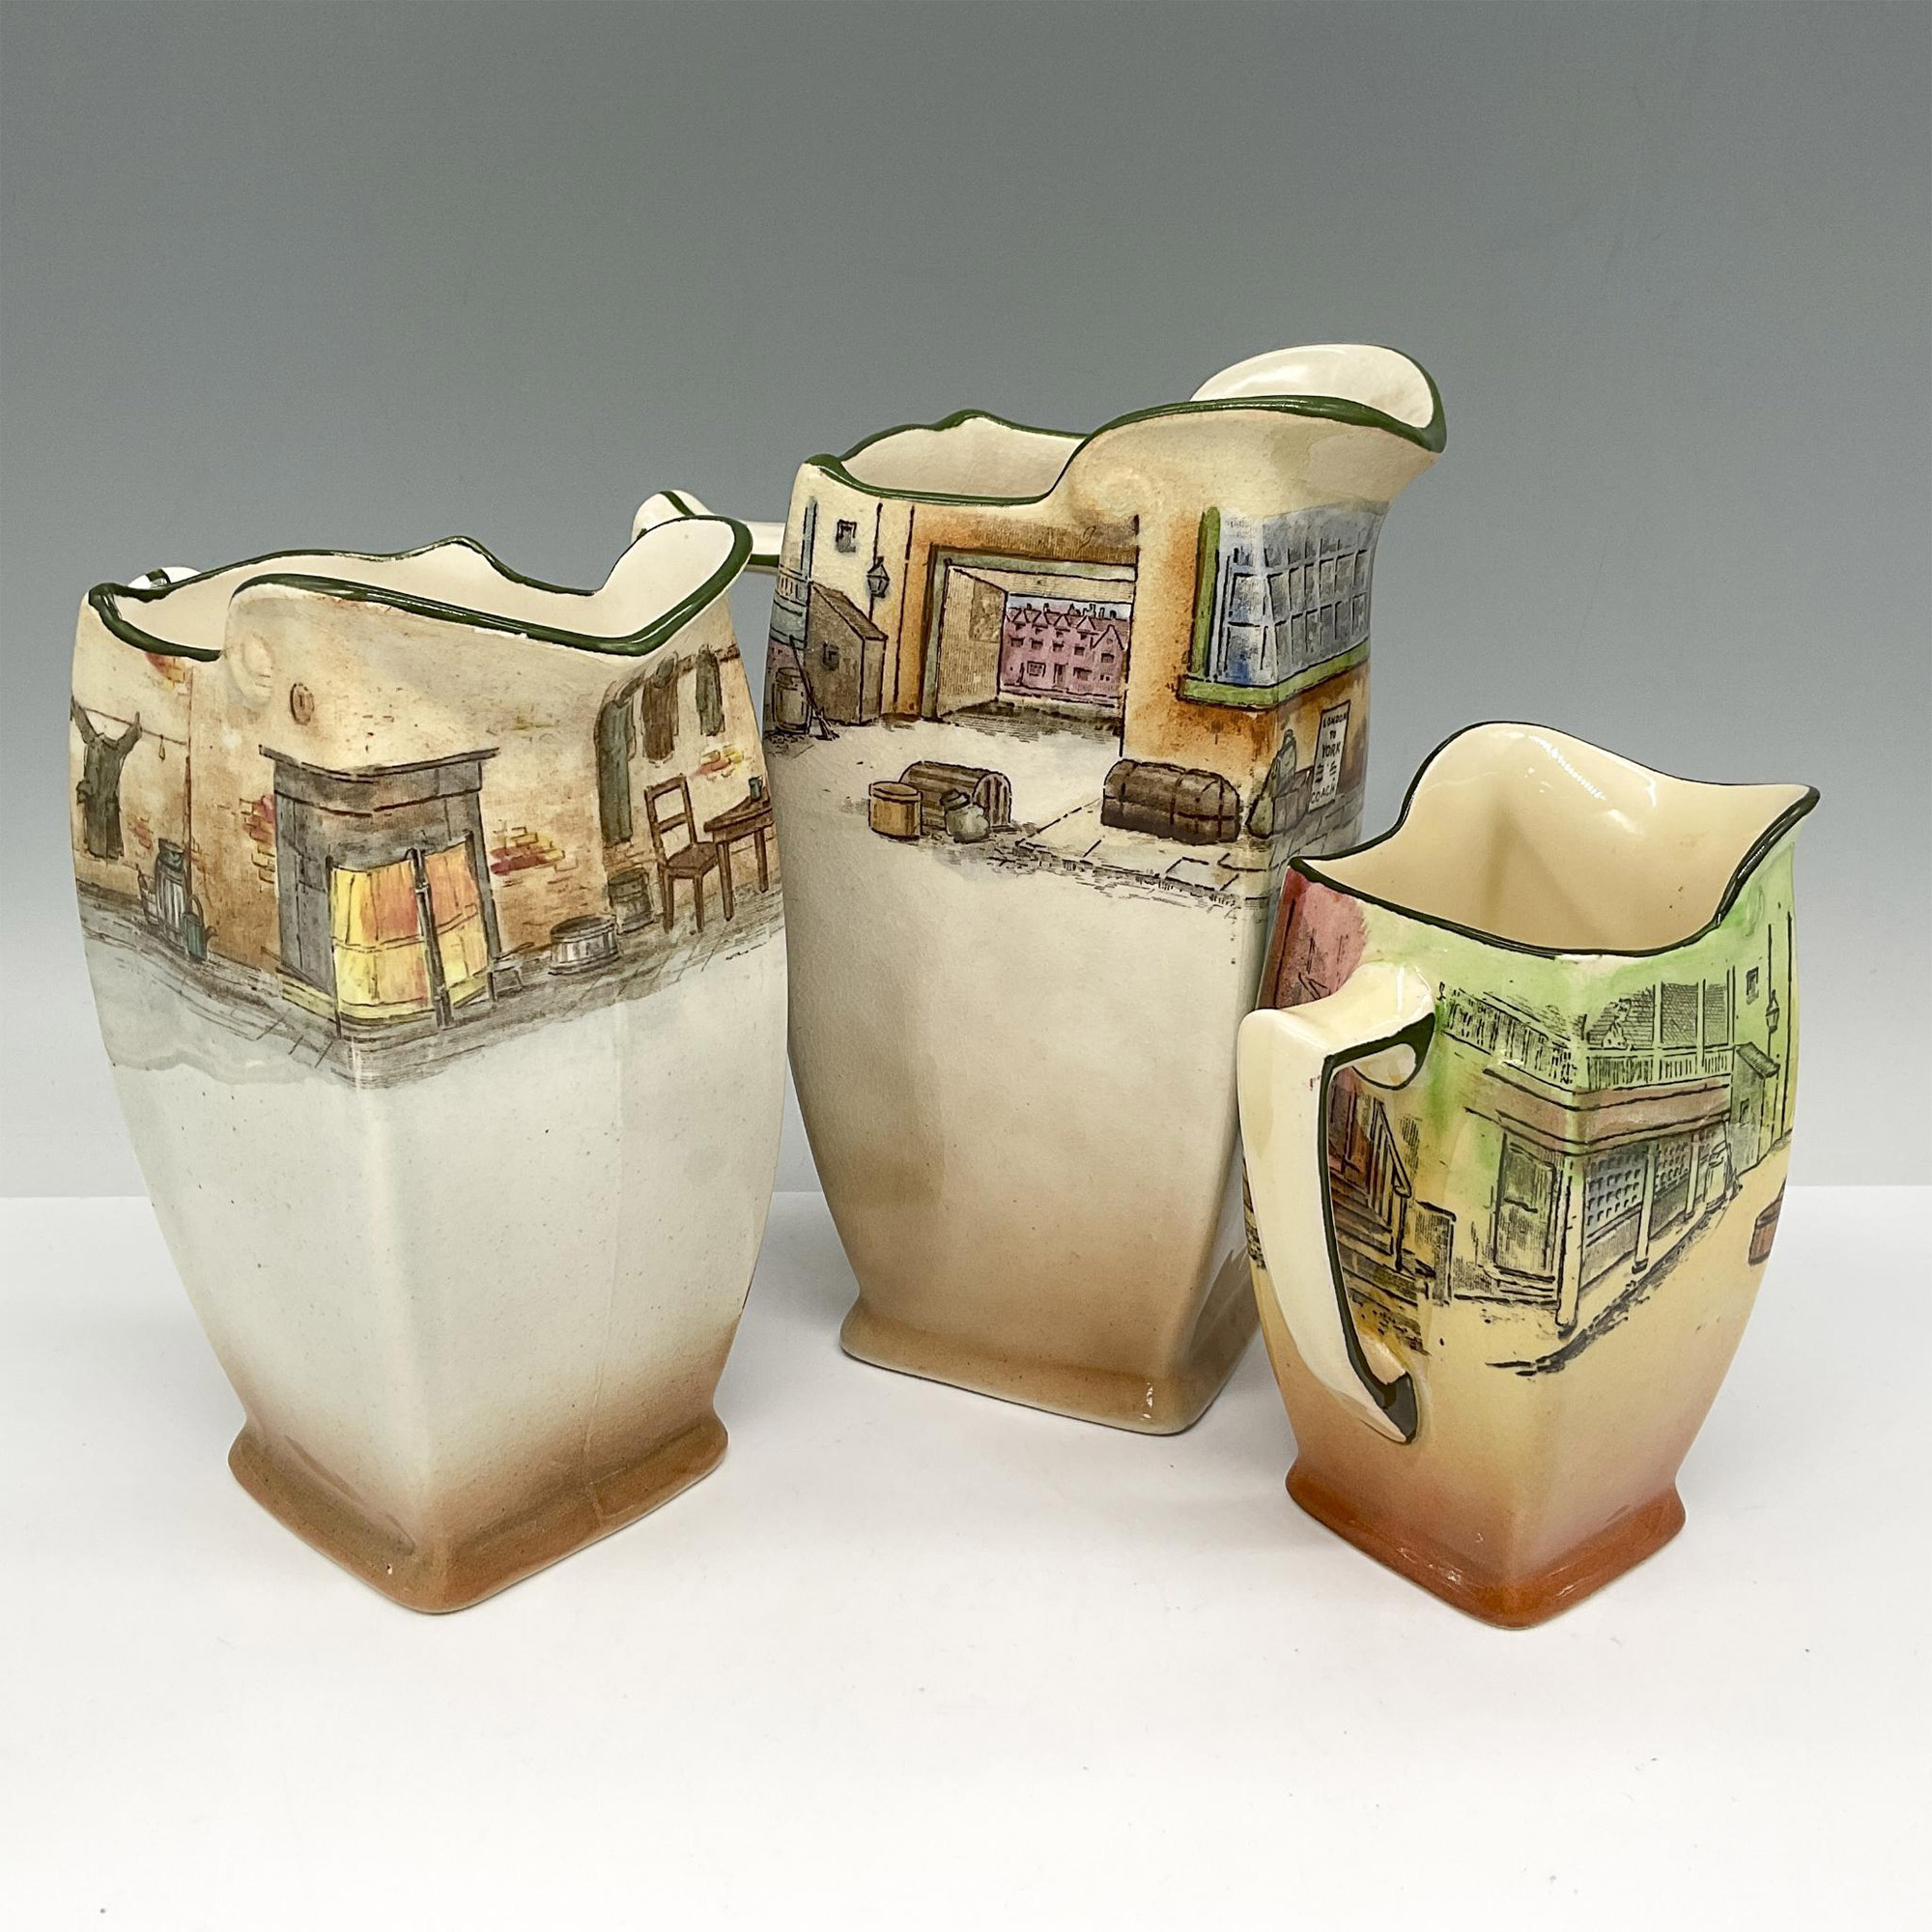 3pc Royal Doulton Dickens Ware Pitchers - Image 2 of 3